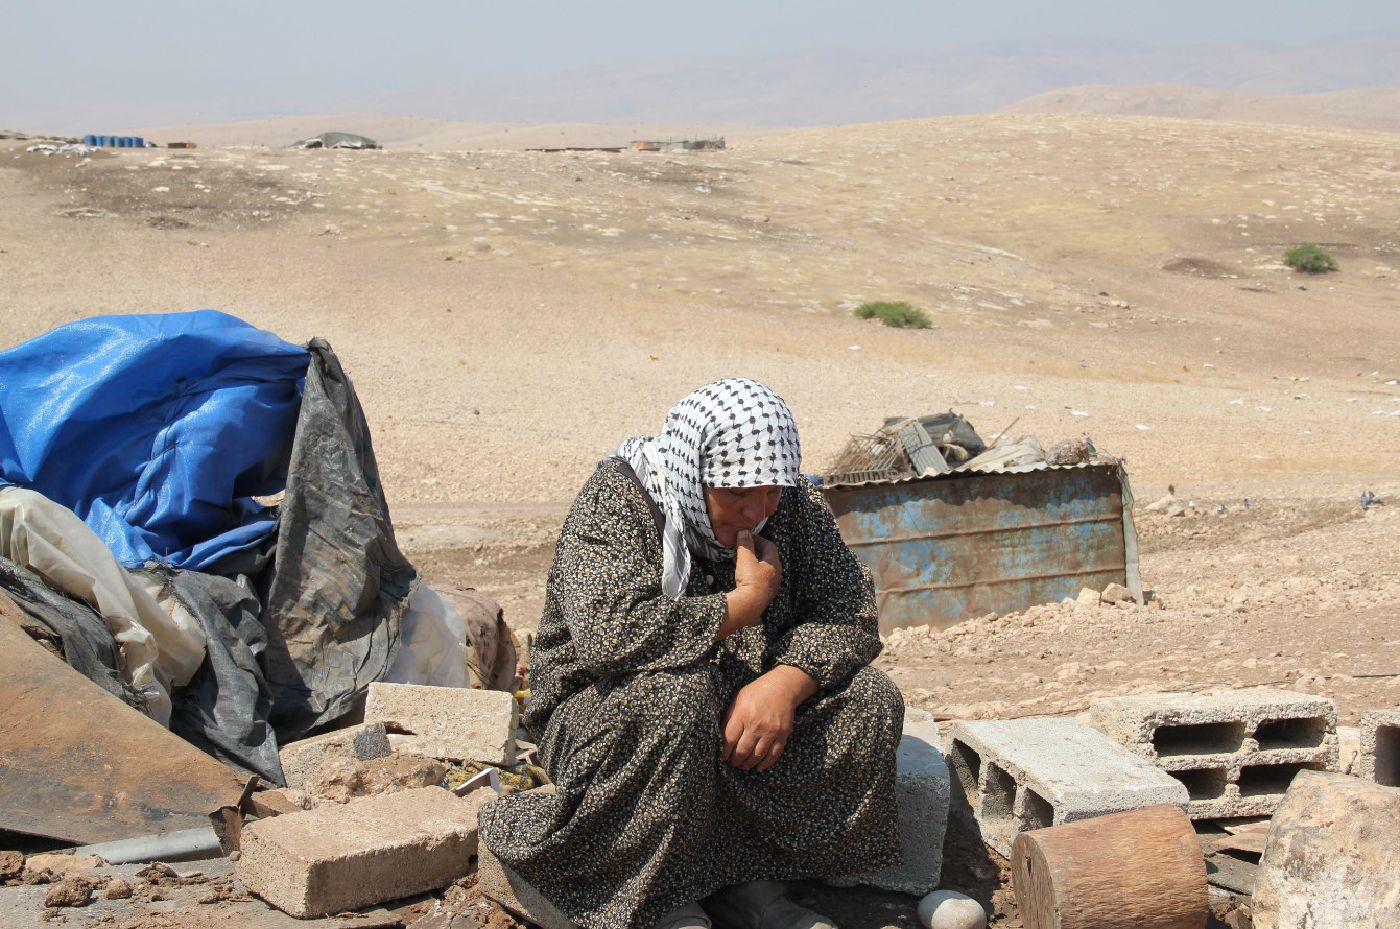 Palestinian woman sits on the rubble of her demolished home in Al Hadidiya. Photo by H. Minch, EAPPI, June 2011